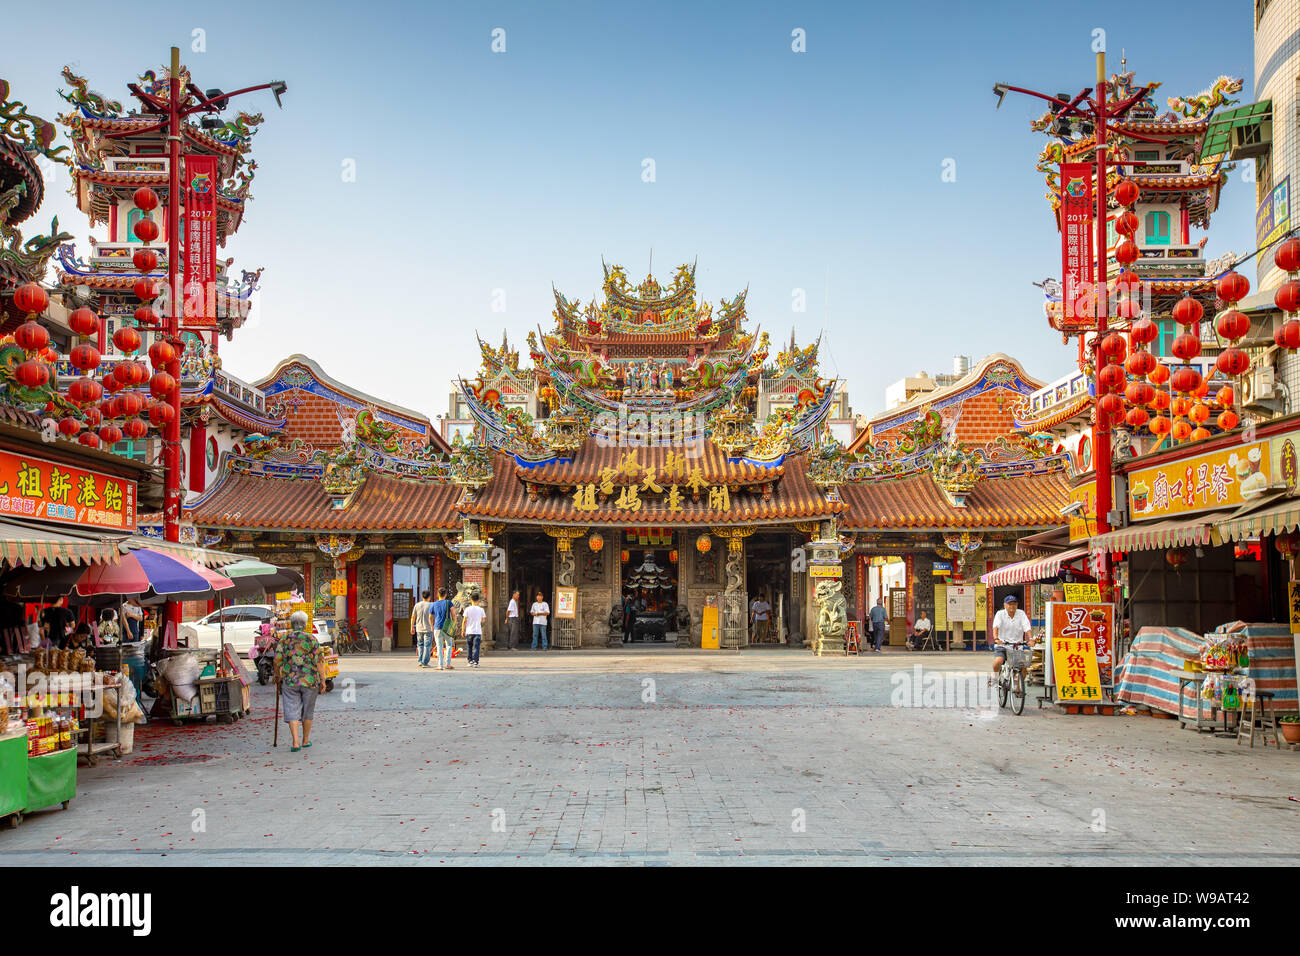 Chiayi, Taiwan - May 6, 2017: Facade view of Fengtian Temple, one of the most important Mazu temples in Taiwan Stock Photo